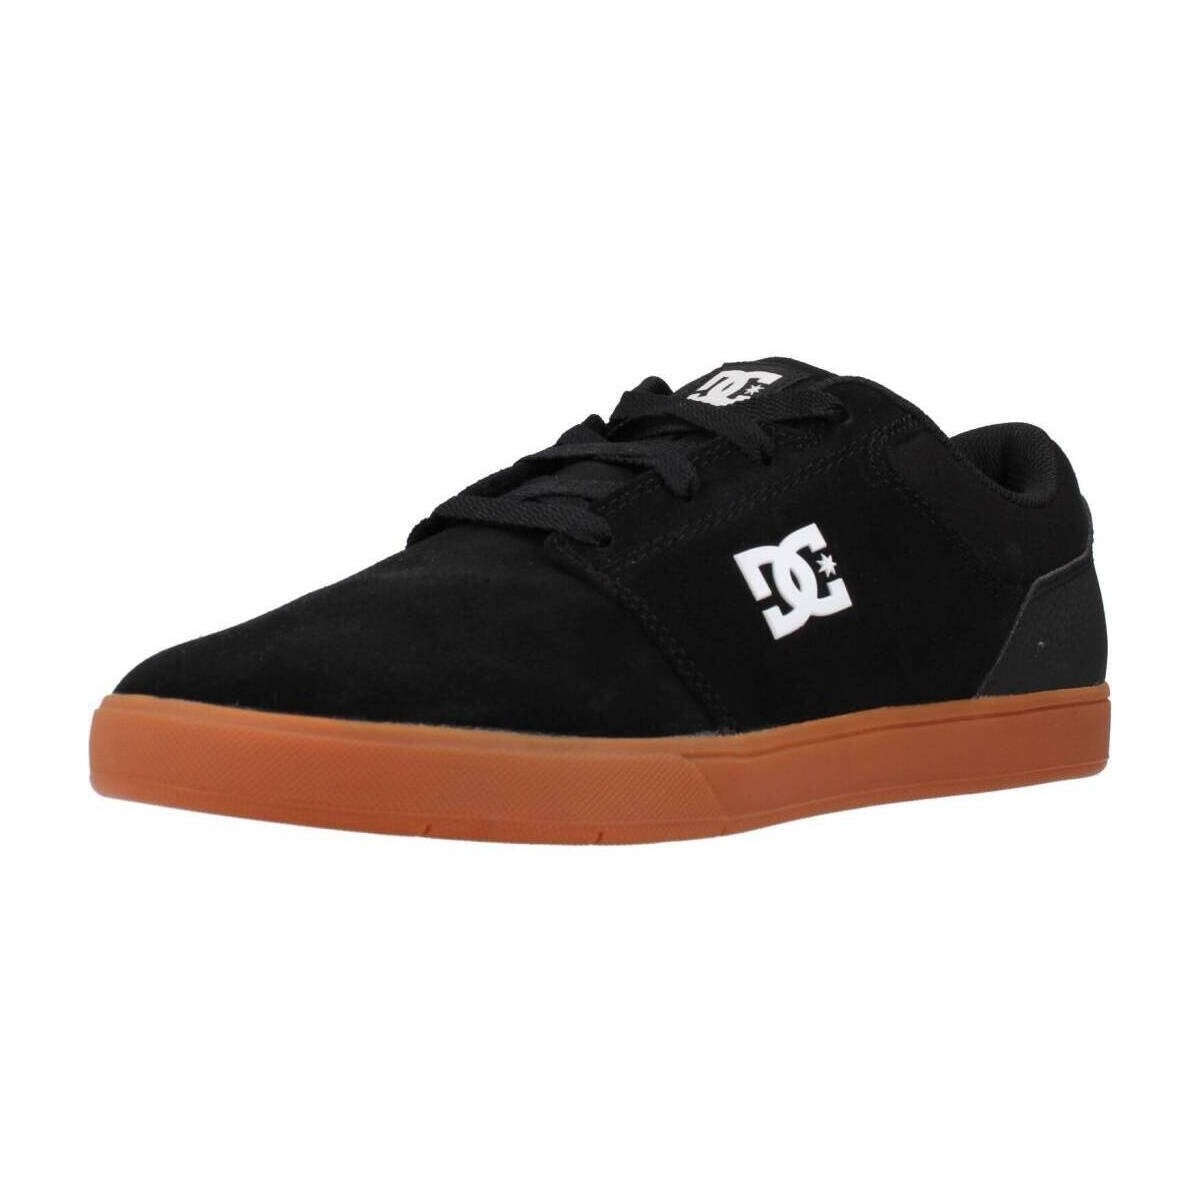 Sneakers in Black Dc Shoes - Spartoo GOOFASH